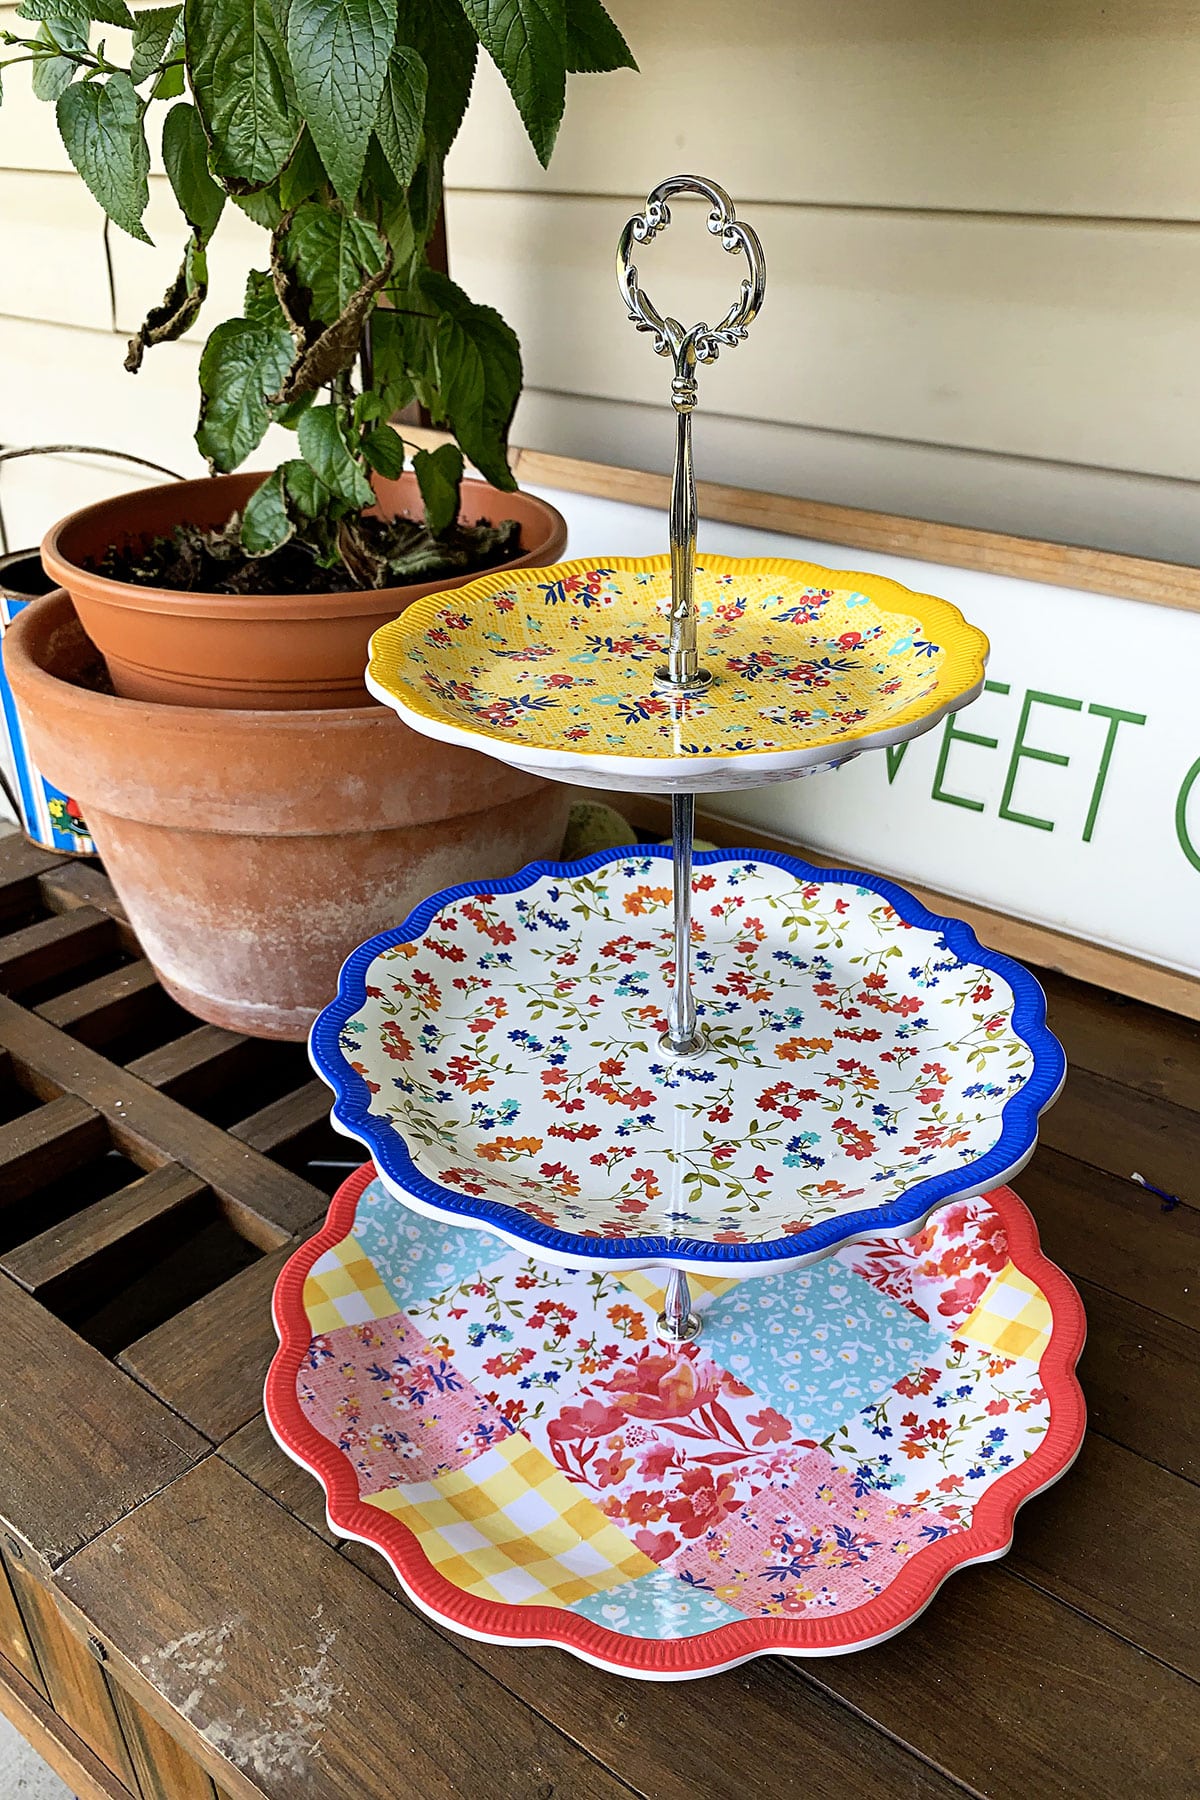 How to make a tiered tray.